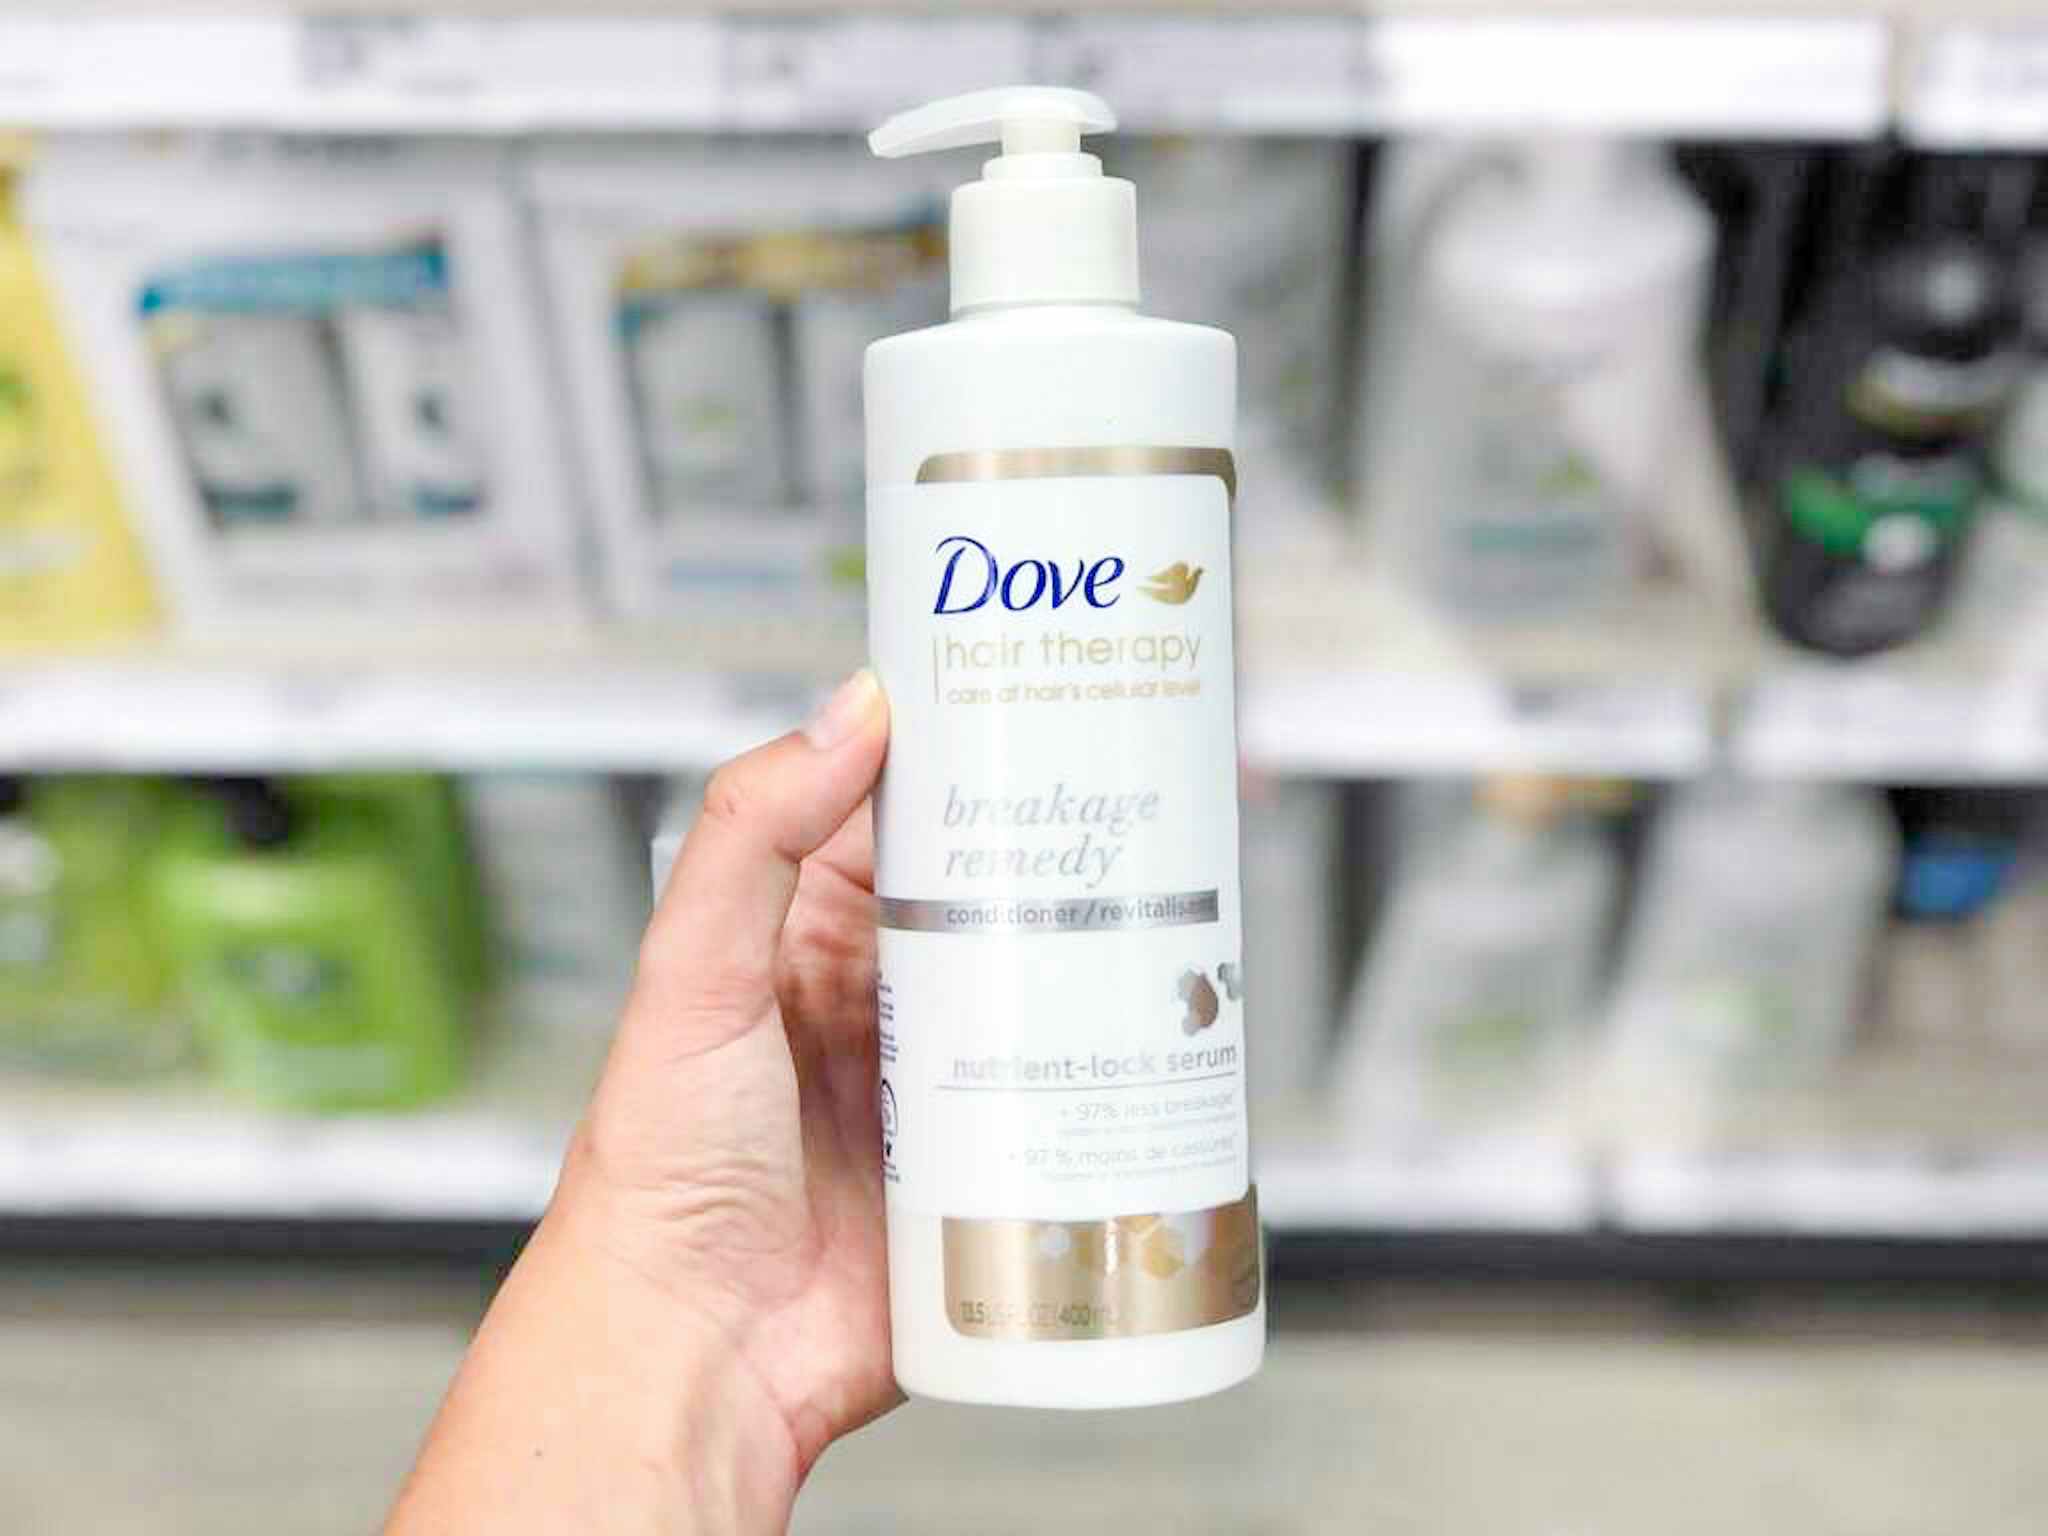 hand holding a bottle of dove hair therapy at target